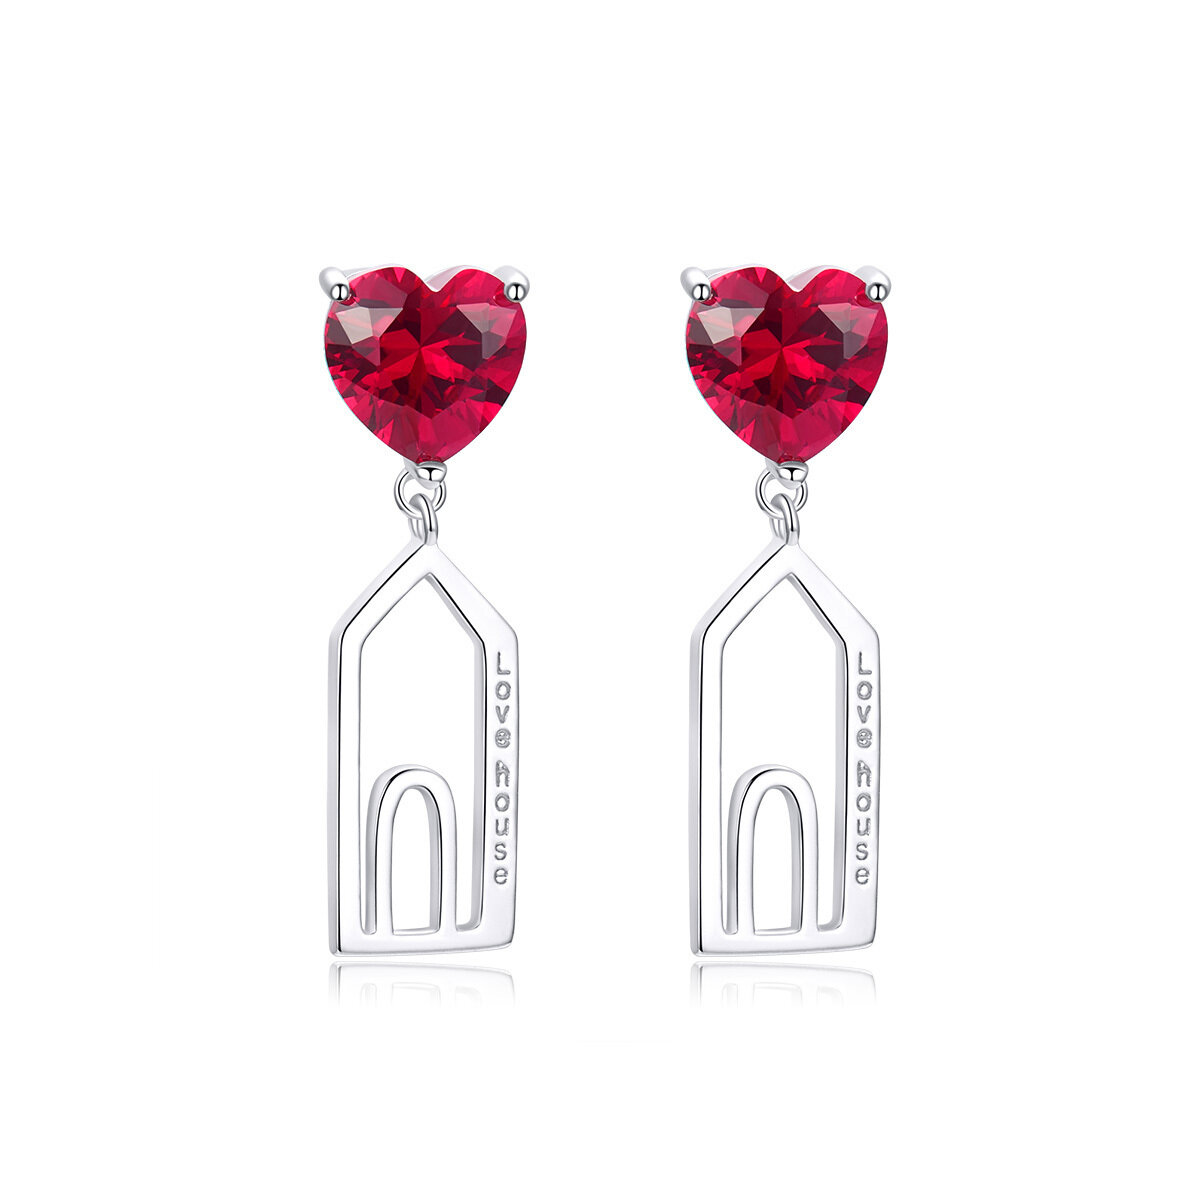 GemKing BSE133 Romantic Home love house S925 Sterling Silver Earring